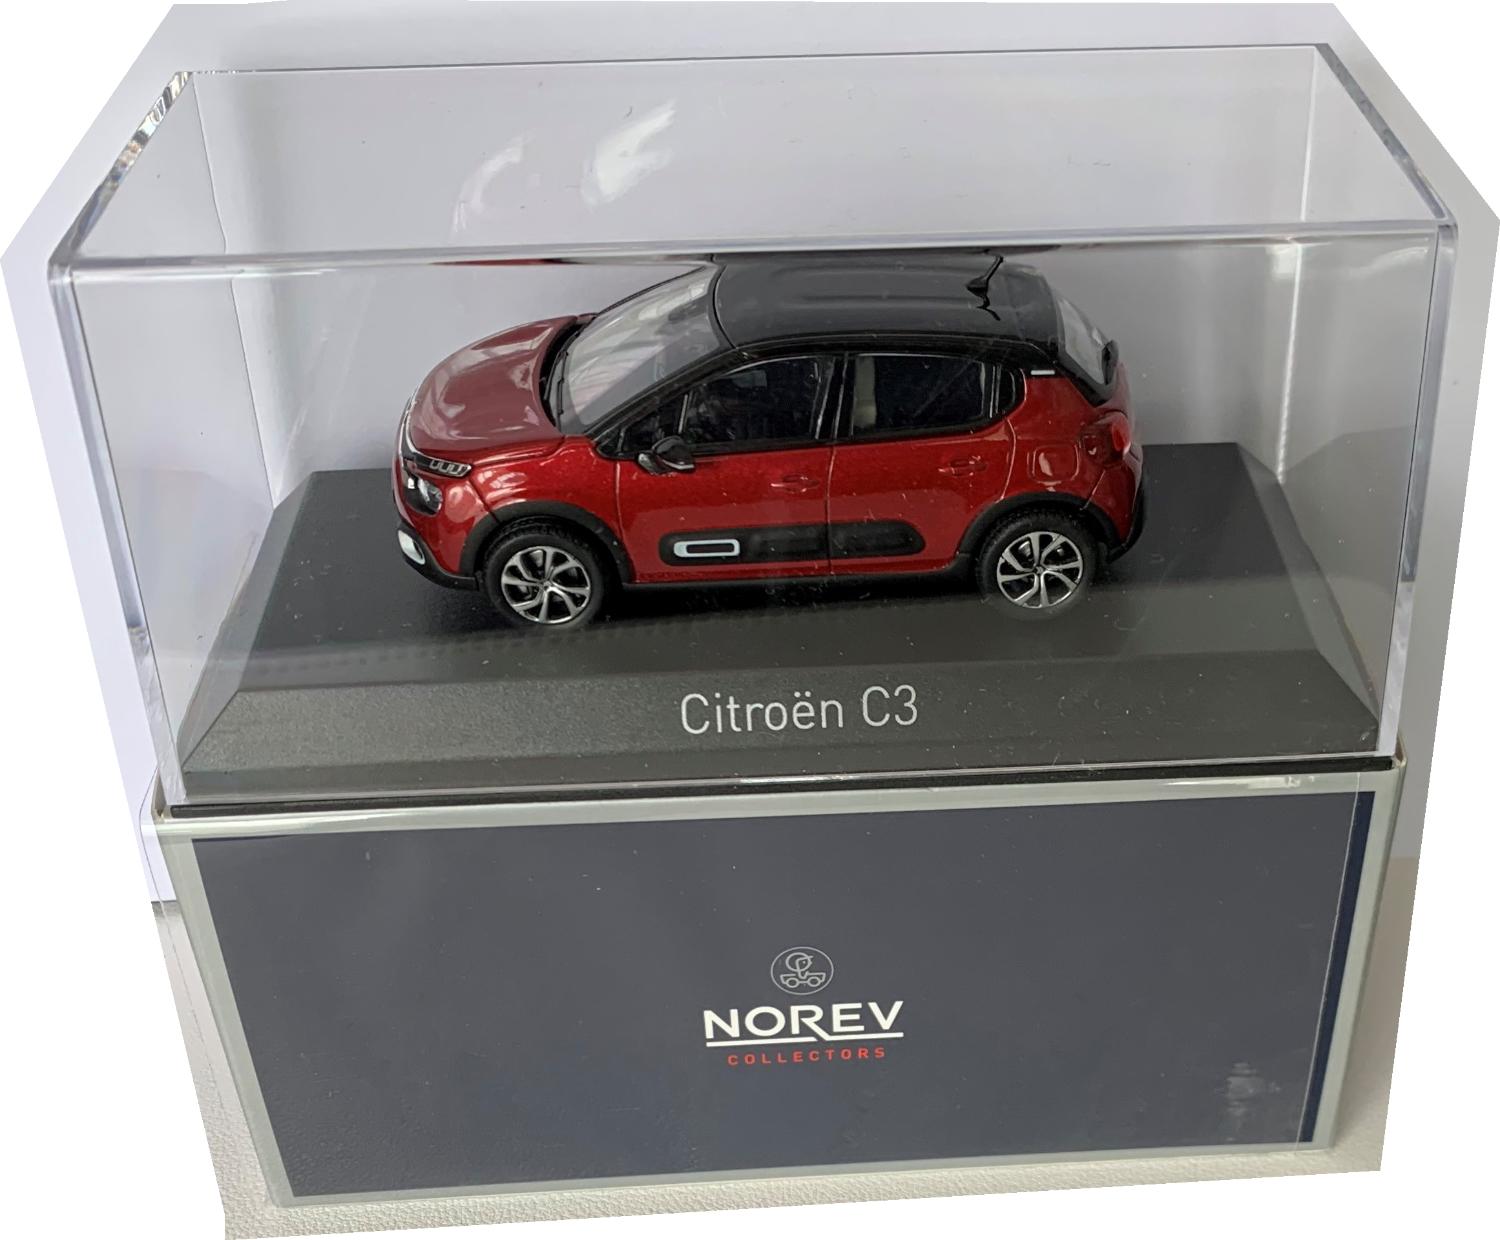 Citroen C3 2020 in red 1:43 scale model from Norev